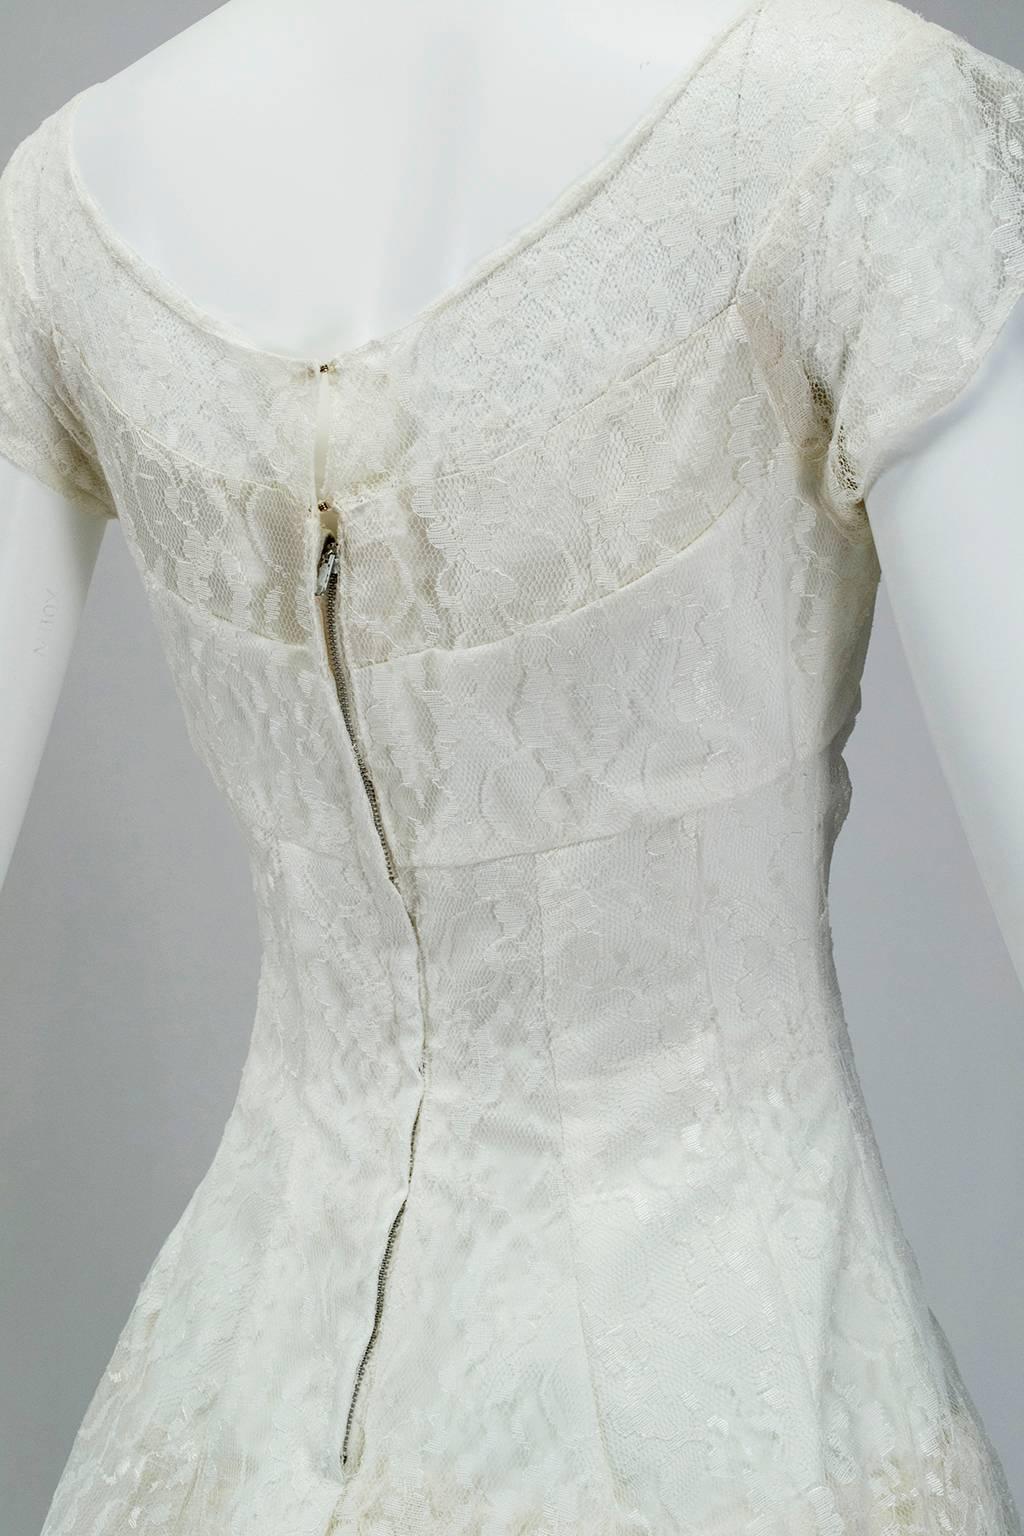 Ivory Lace Drop-Waist Wedding Gown with Bateau Neck - XS, 1950s For Sale 4